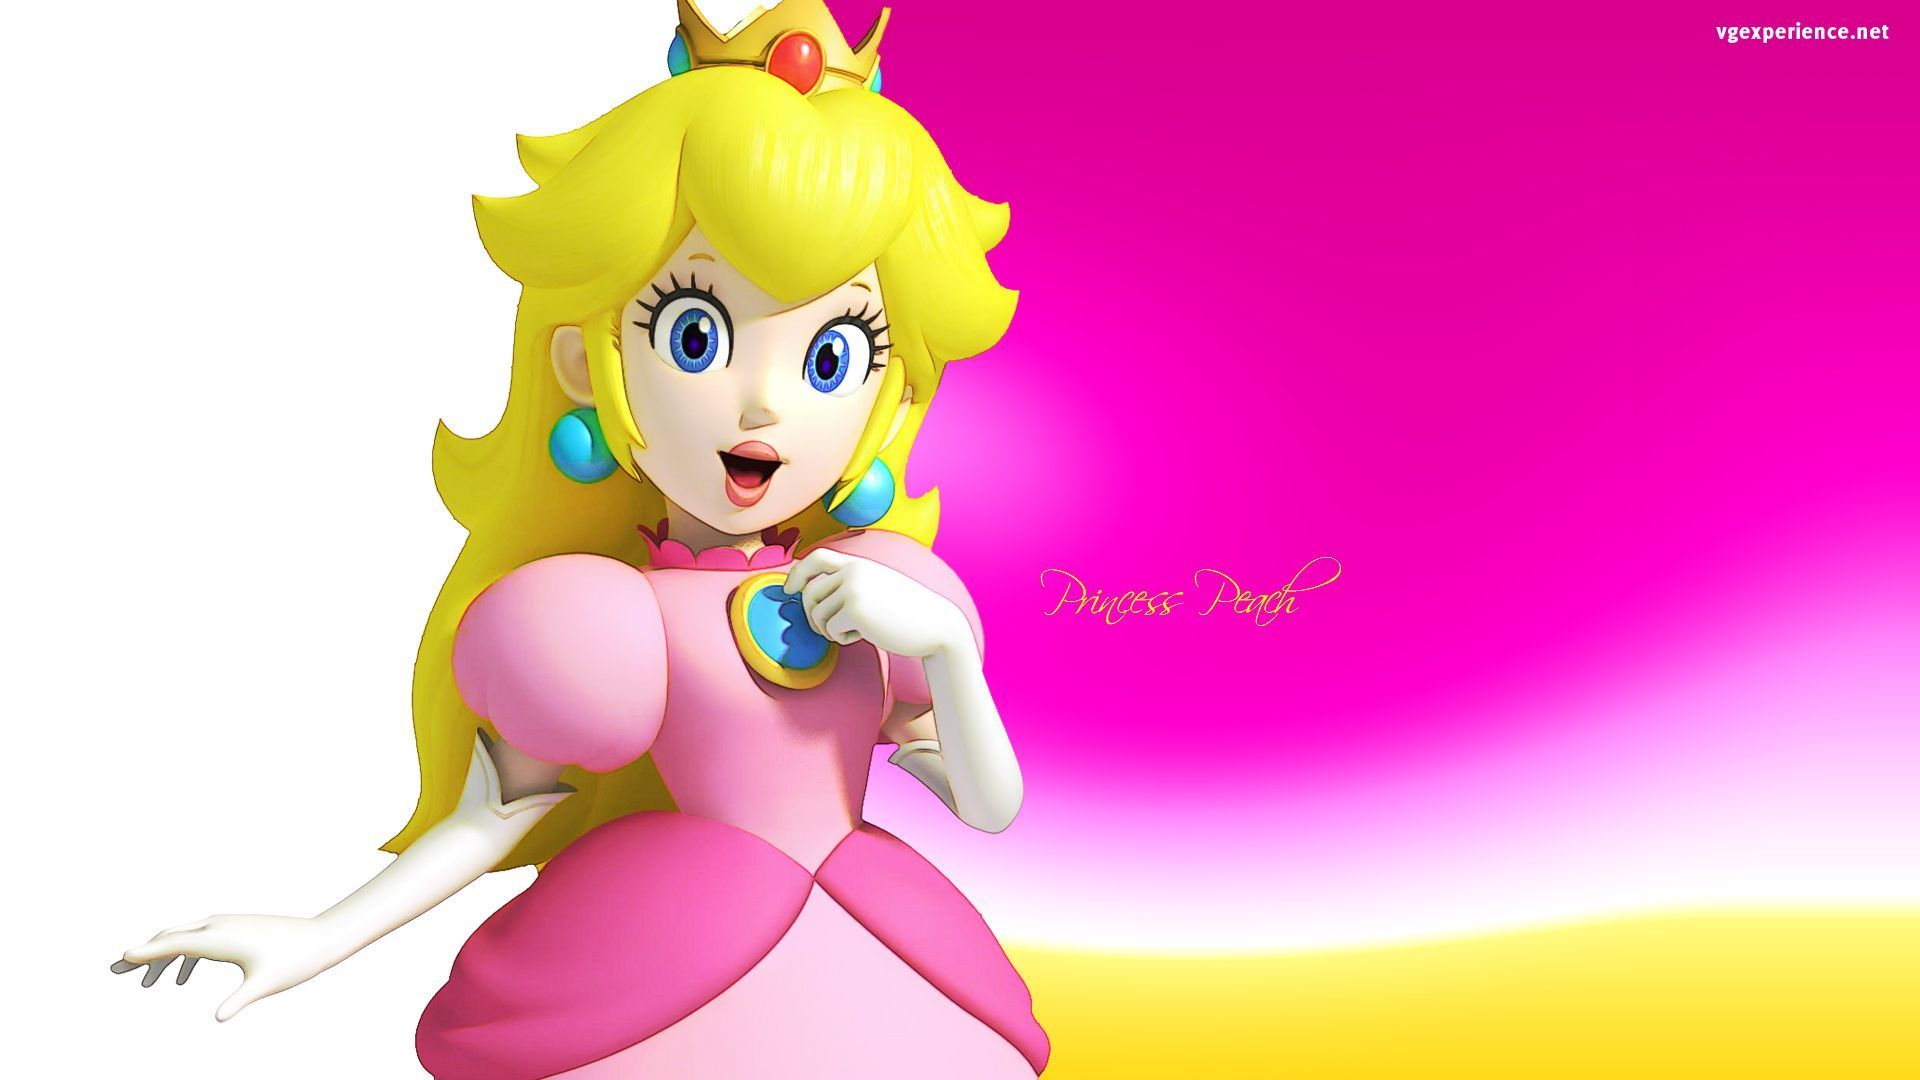 Princess Peach with a ring in her hand wallpaper - Game wallpapers - #10398 - Princess Peach